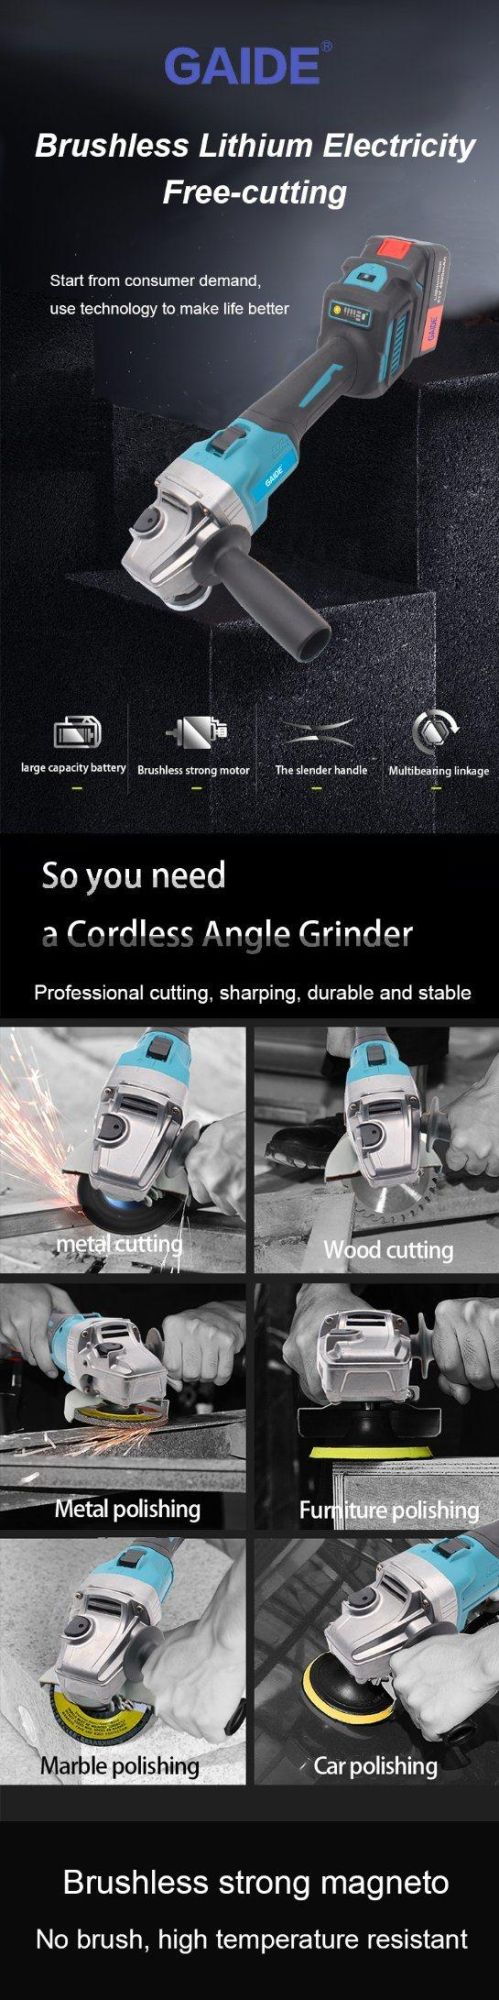 Cordless Angle Grinder 115mm Grinding and Cutting